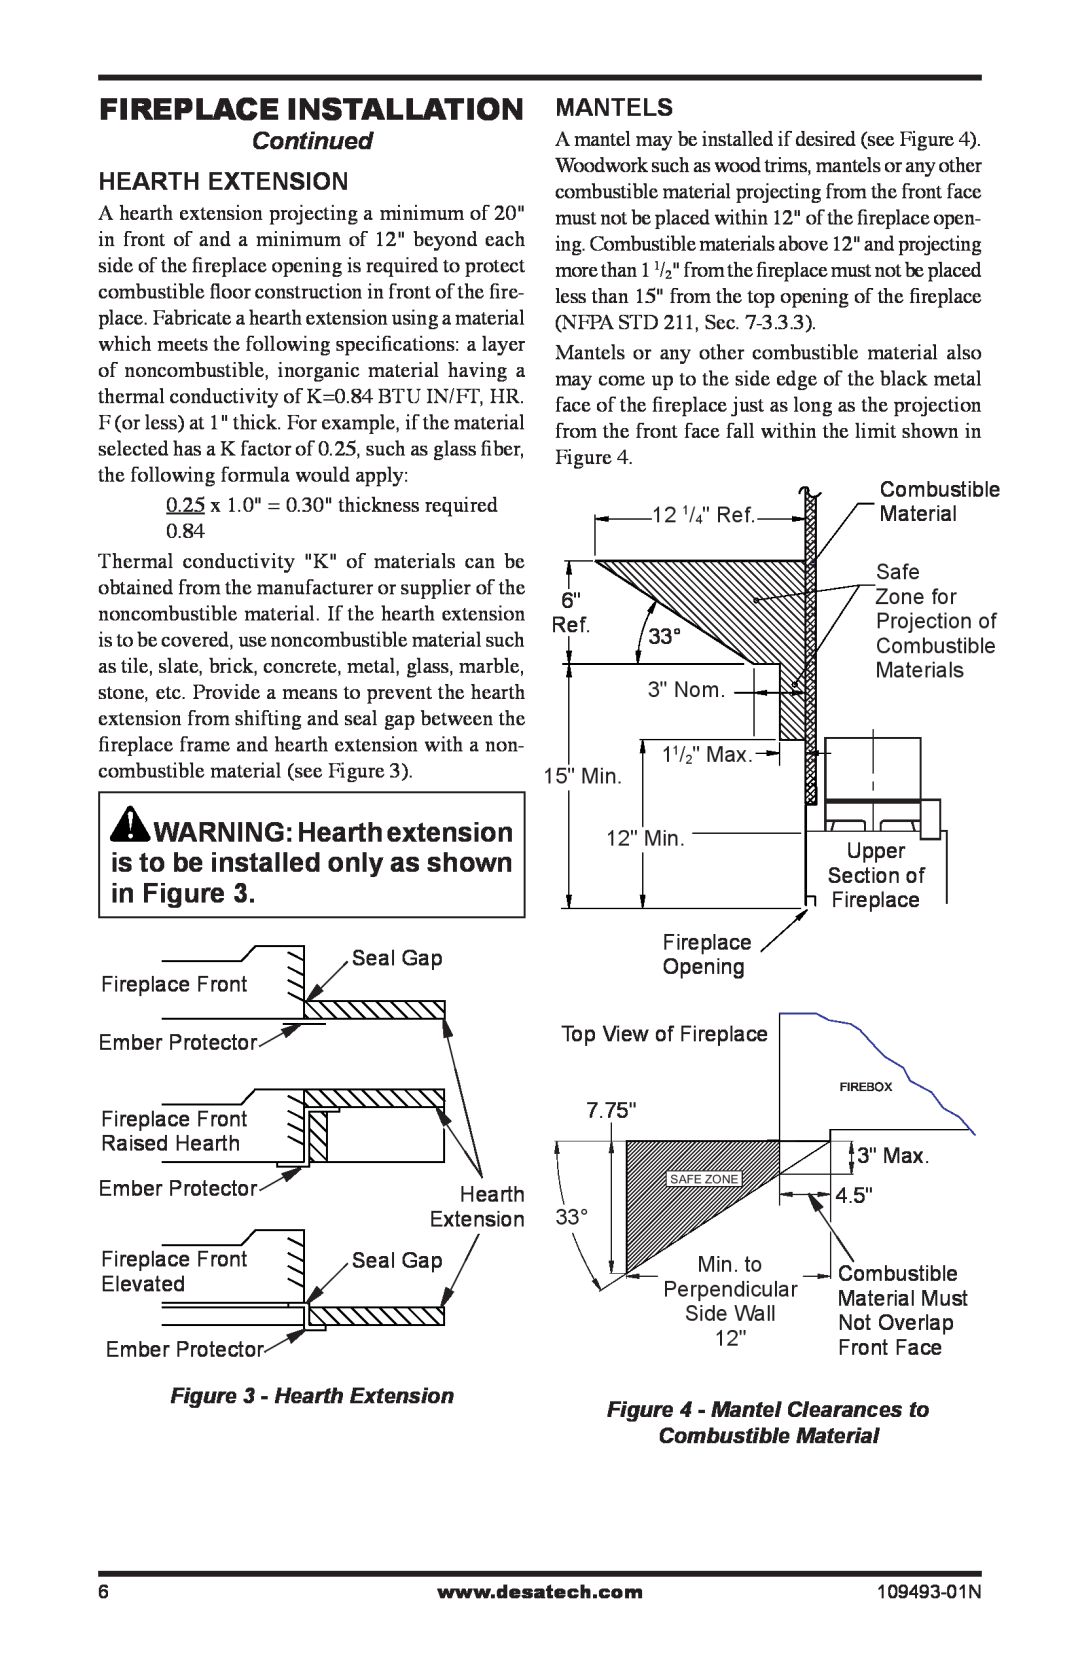 Desa (V)G42H/50H Fireplace Installation, WARNING Hearth extension, is to be installed only as shown in Figure, Continued 